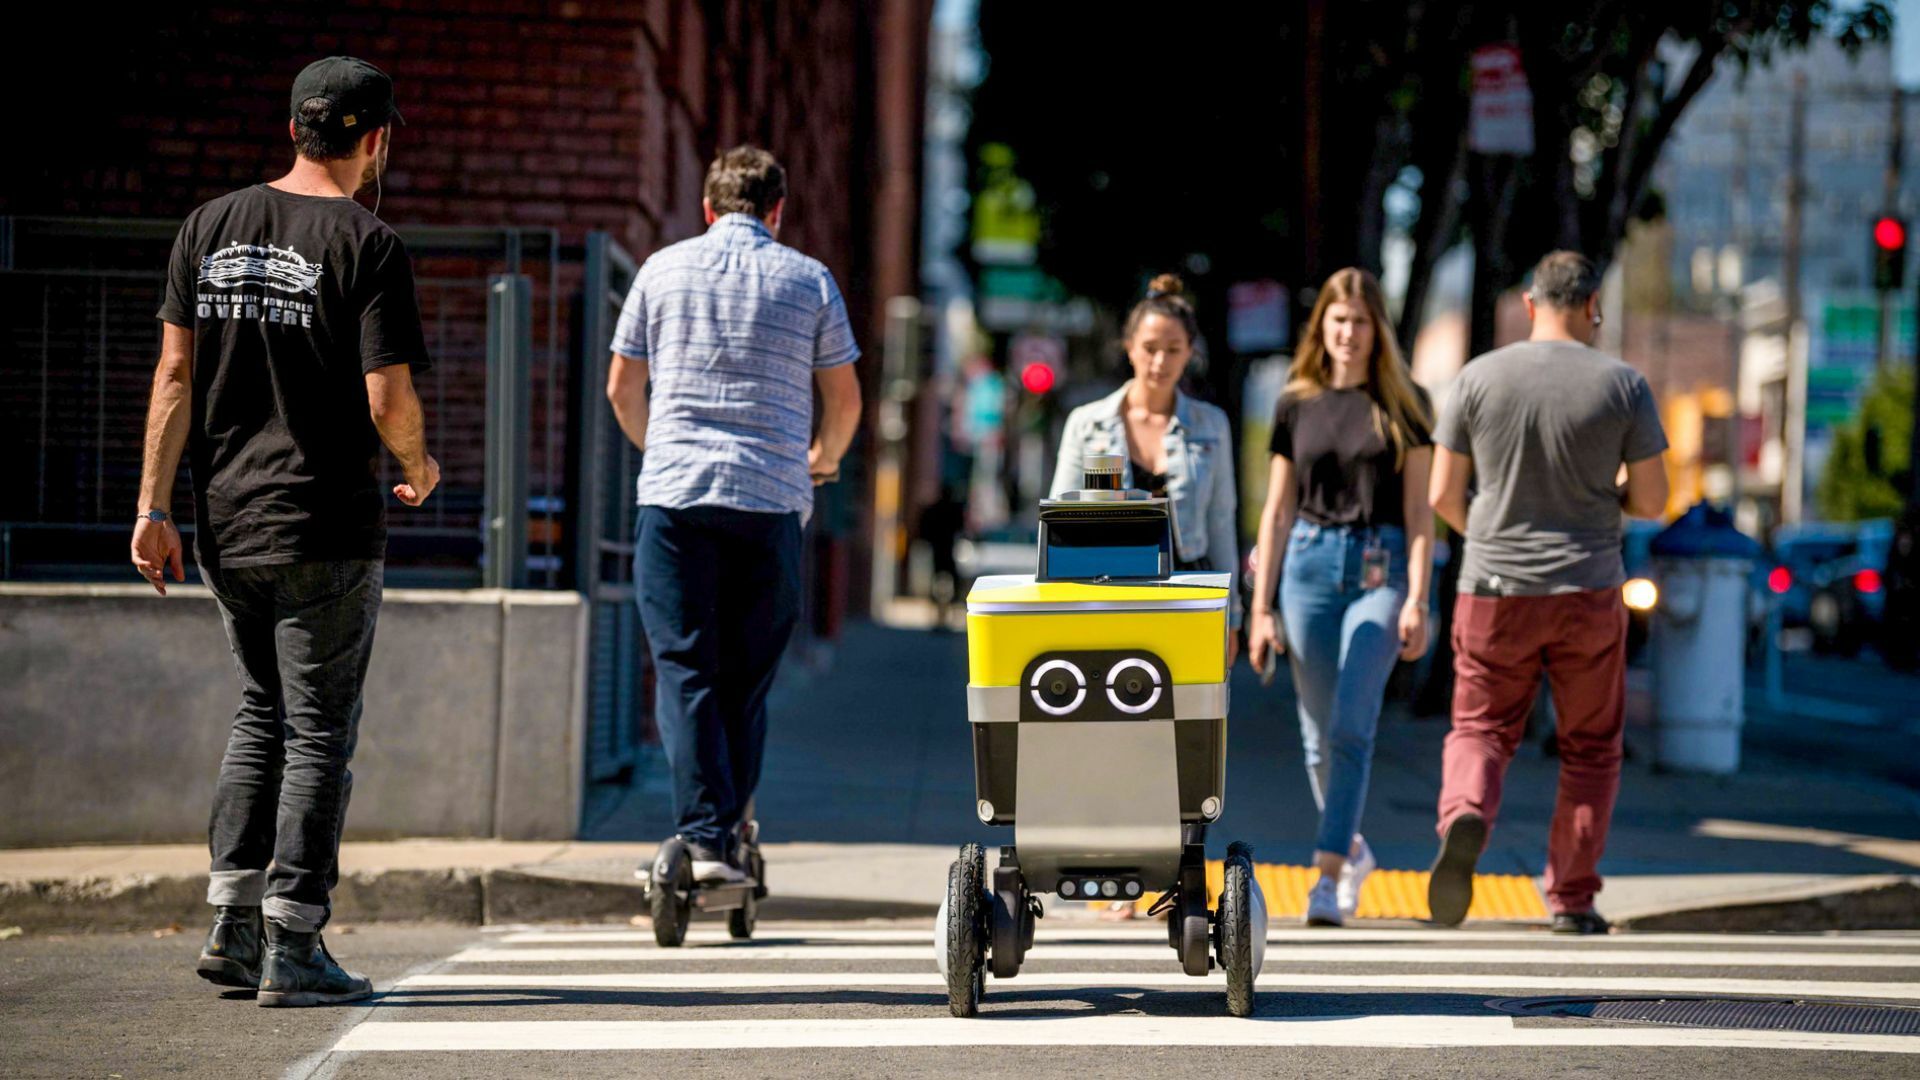 A robot on the sidewalk surrounded by people.